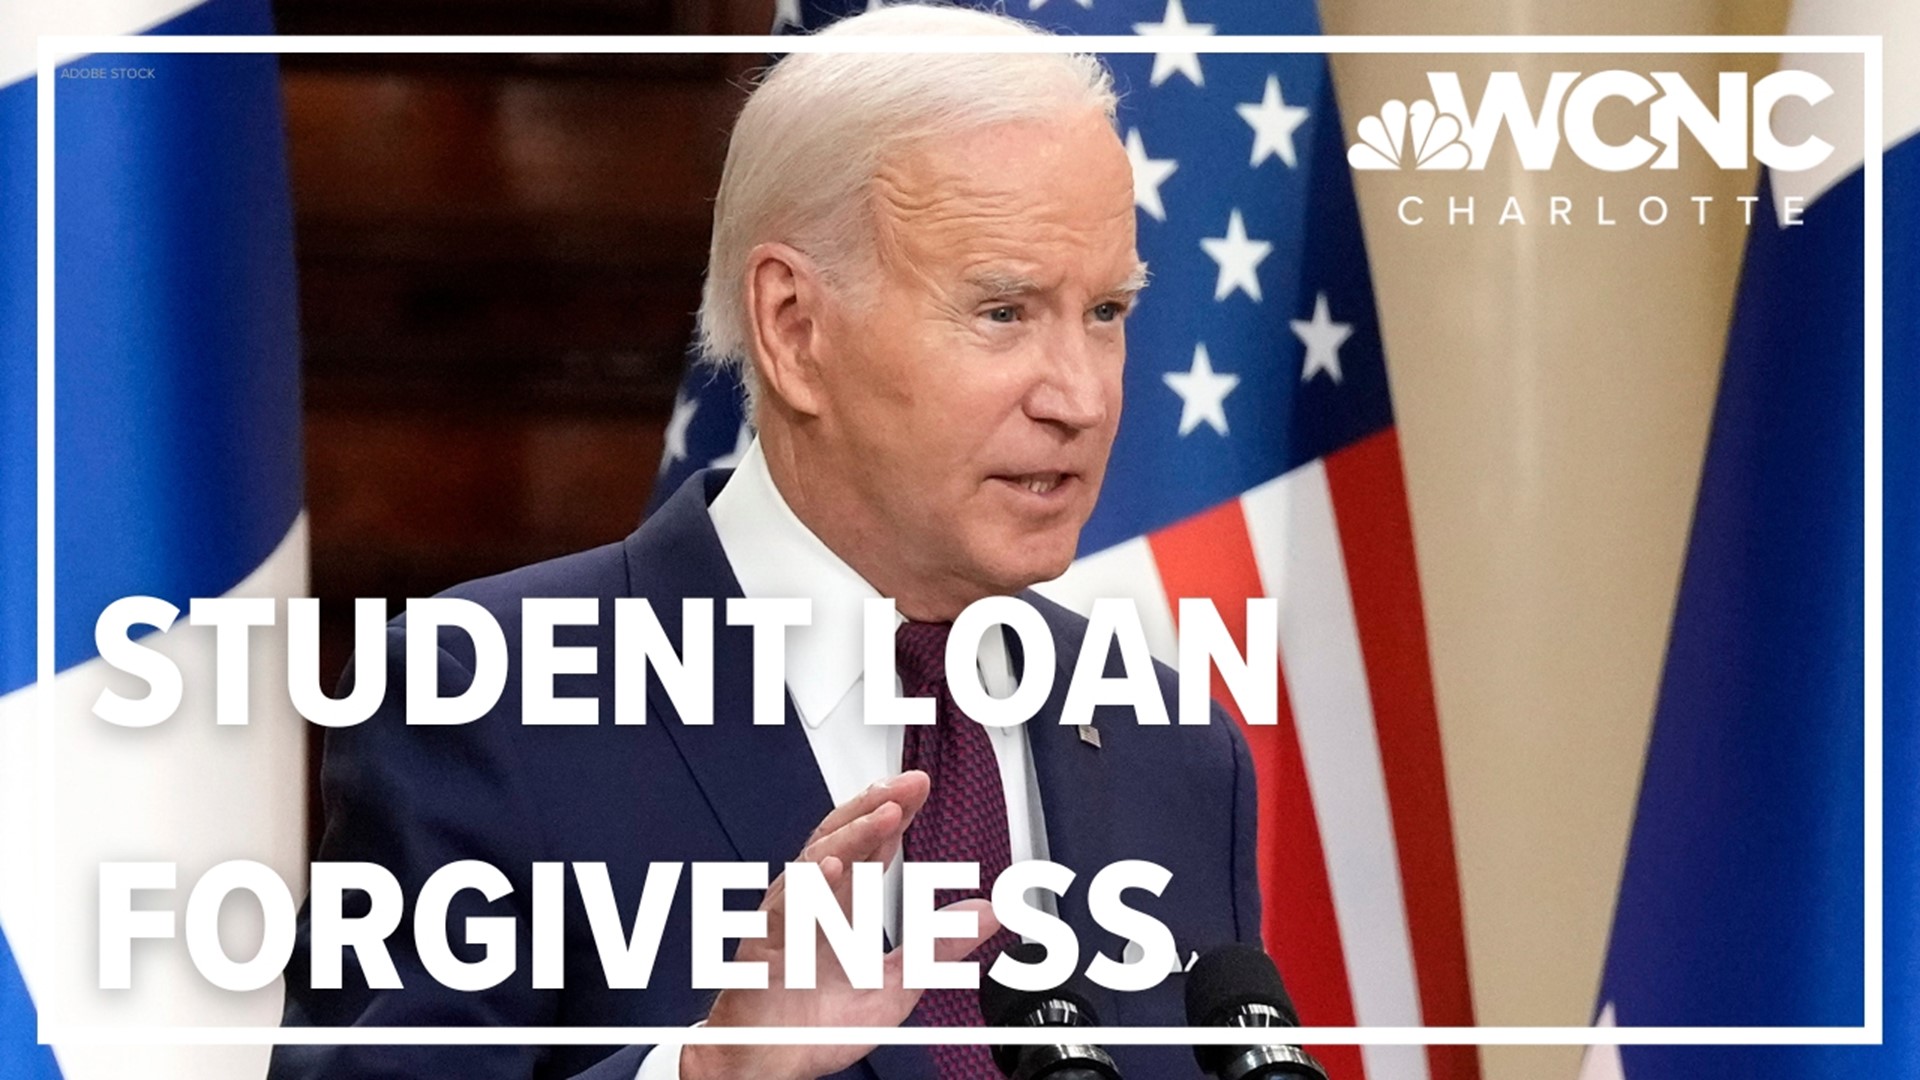 The Biden administration said the student loan forgiveness for hundreds of thousands of people is being offered to correct errors from previous administrations.